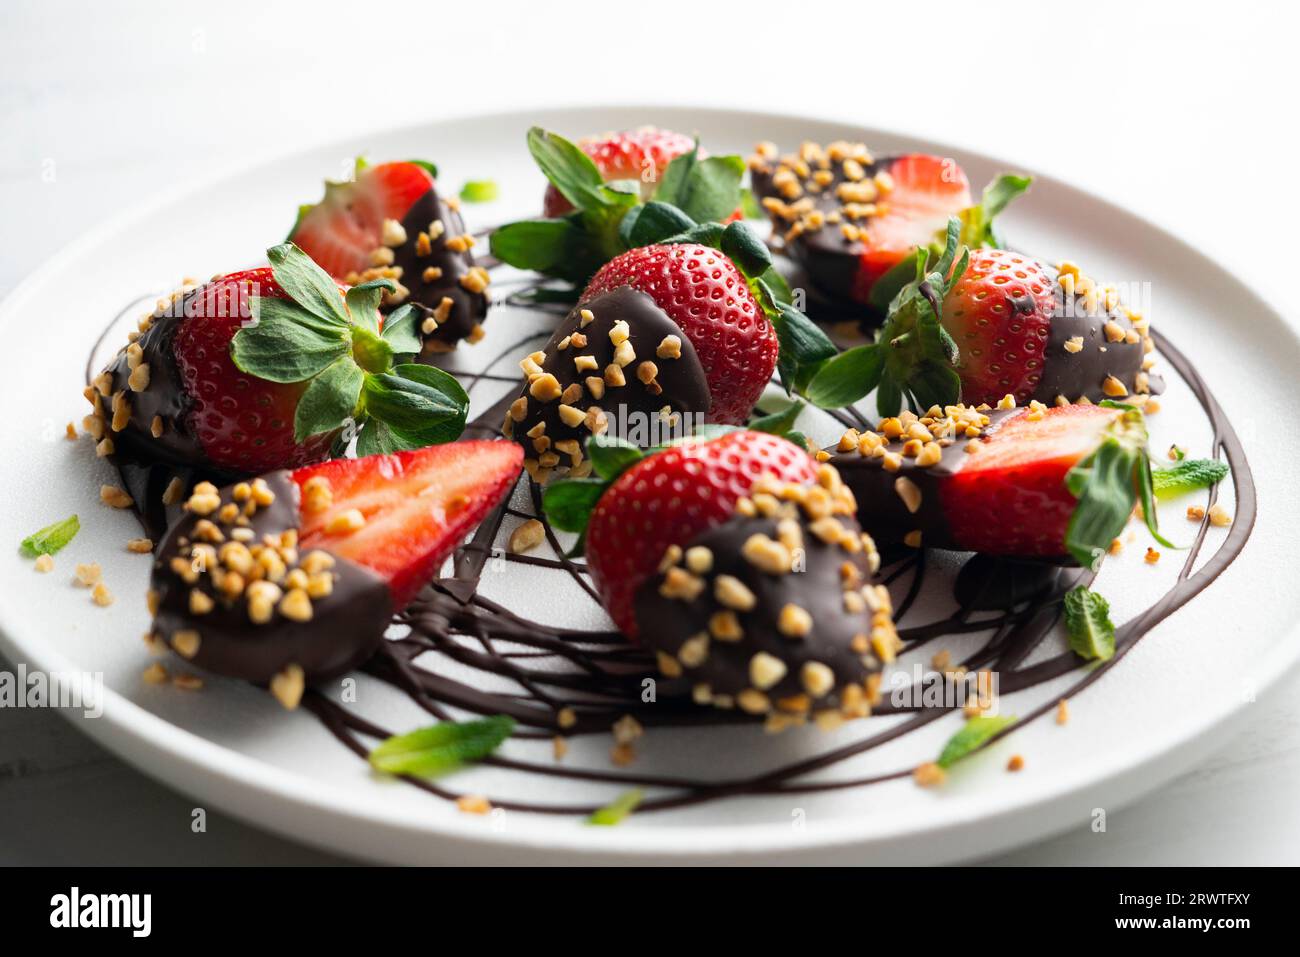 Strawberries dipped in dark chocolate and coated with toasted almonds. Stock Photo